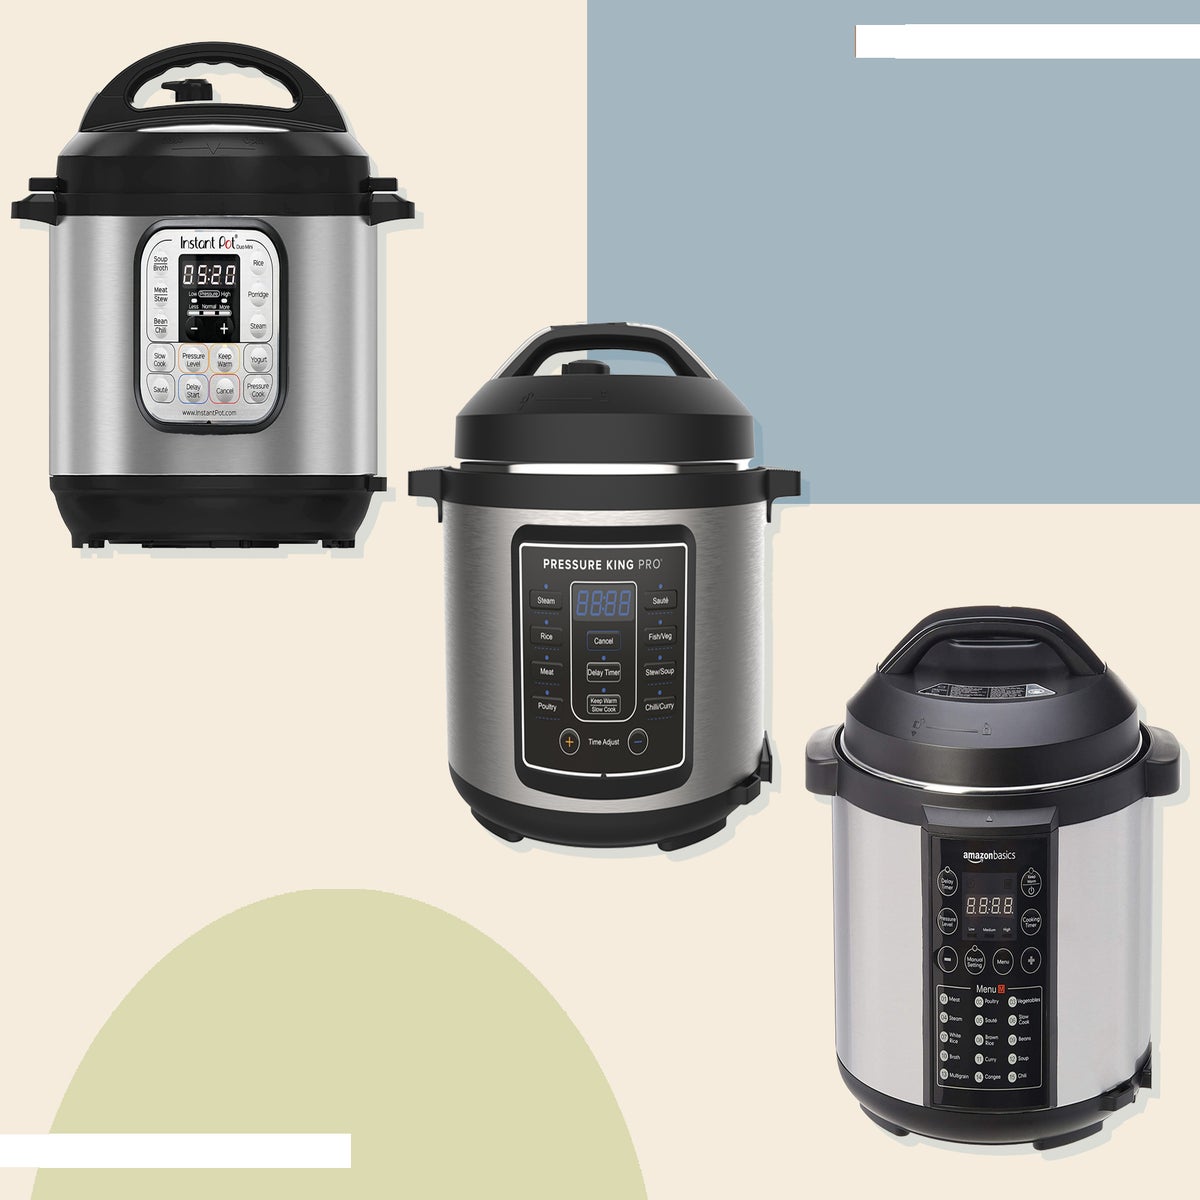 https://static.independent.co.uk/2022/09/09/10/pressure%20cookers%20copy.jpg?width=1200&height=1200&fit=crop